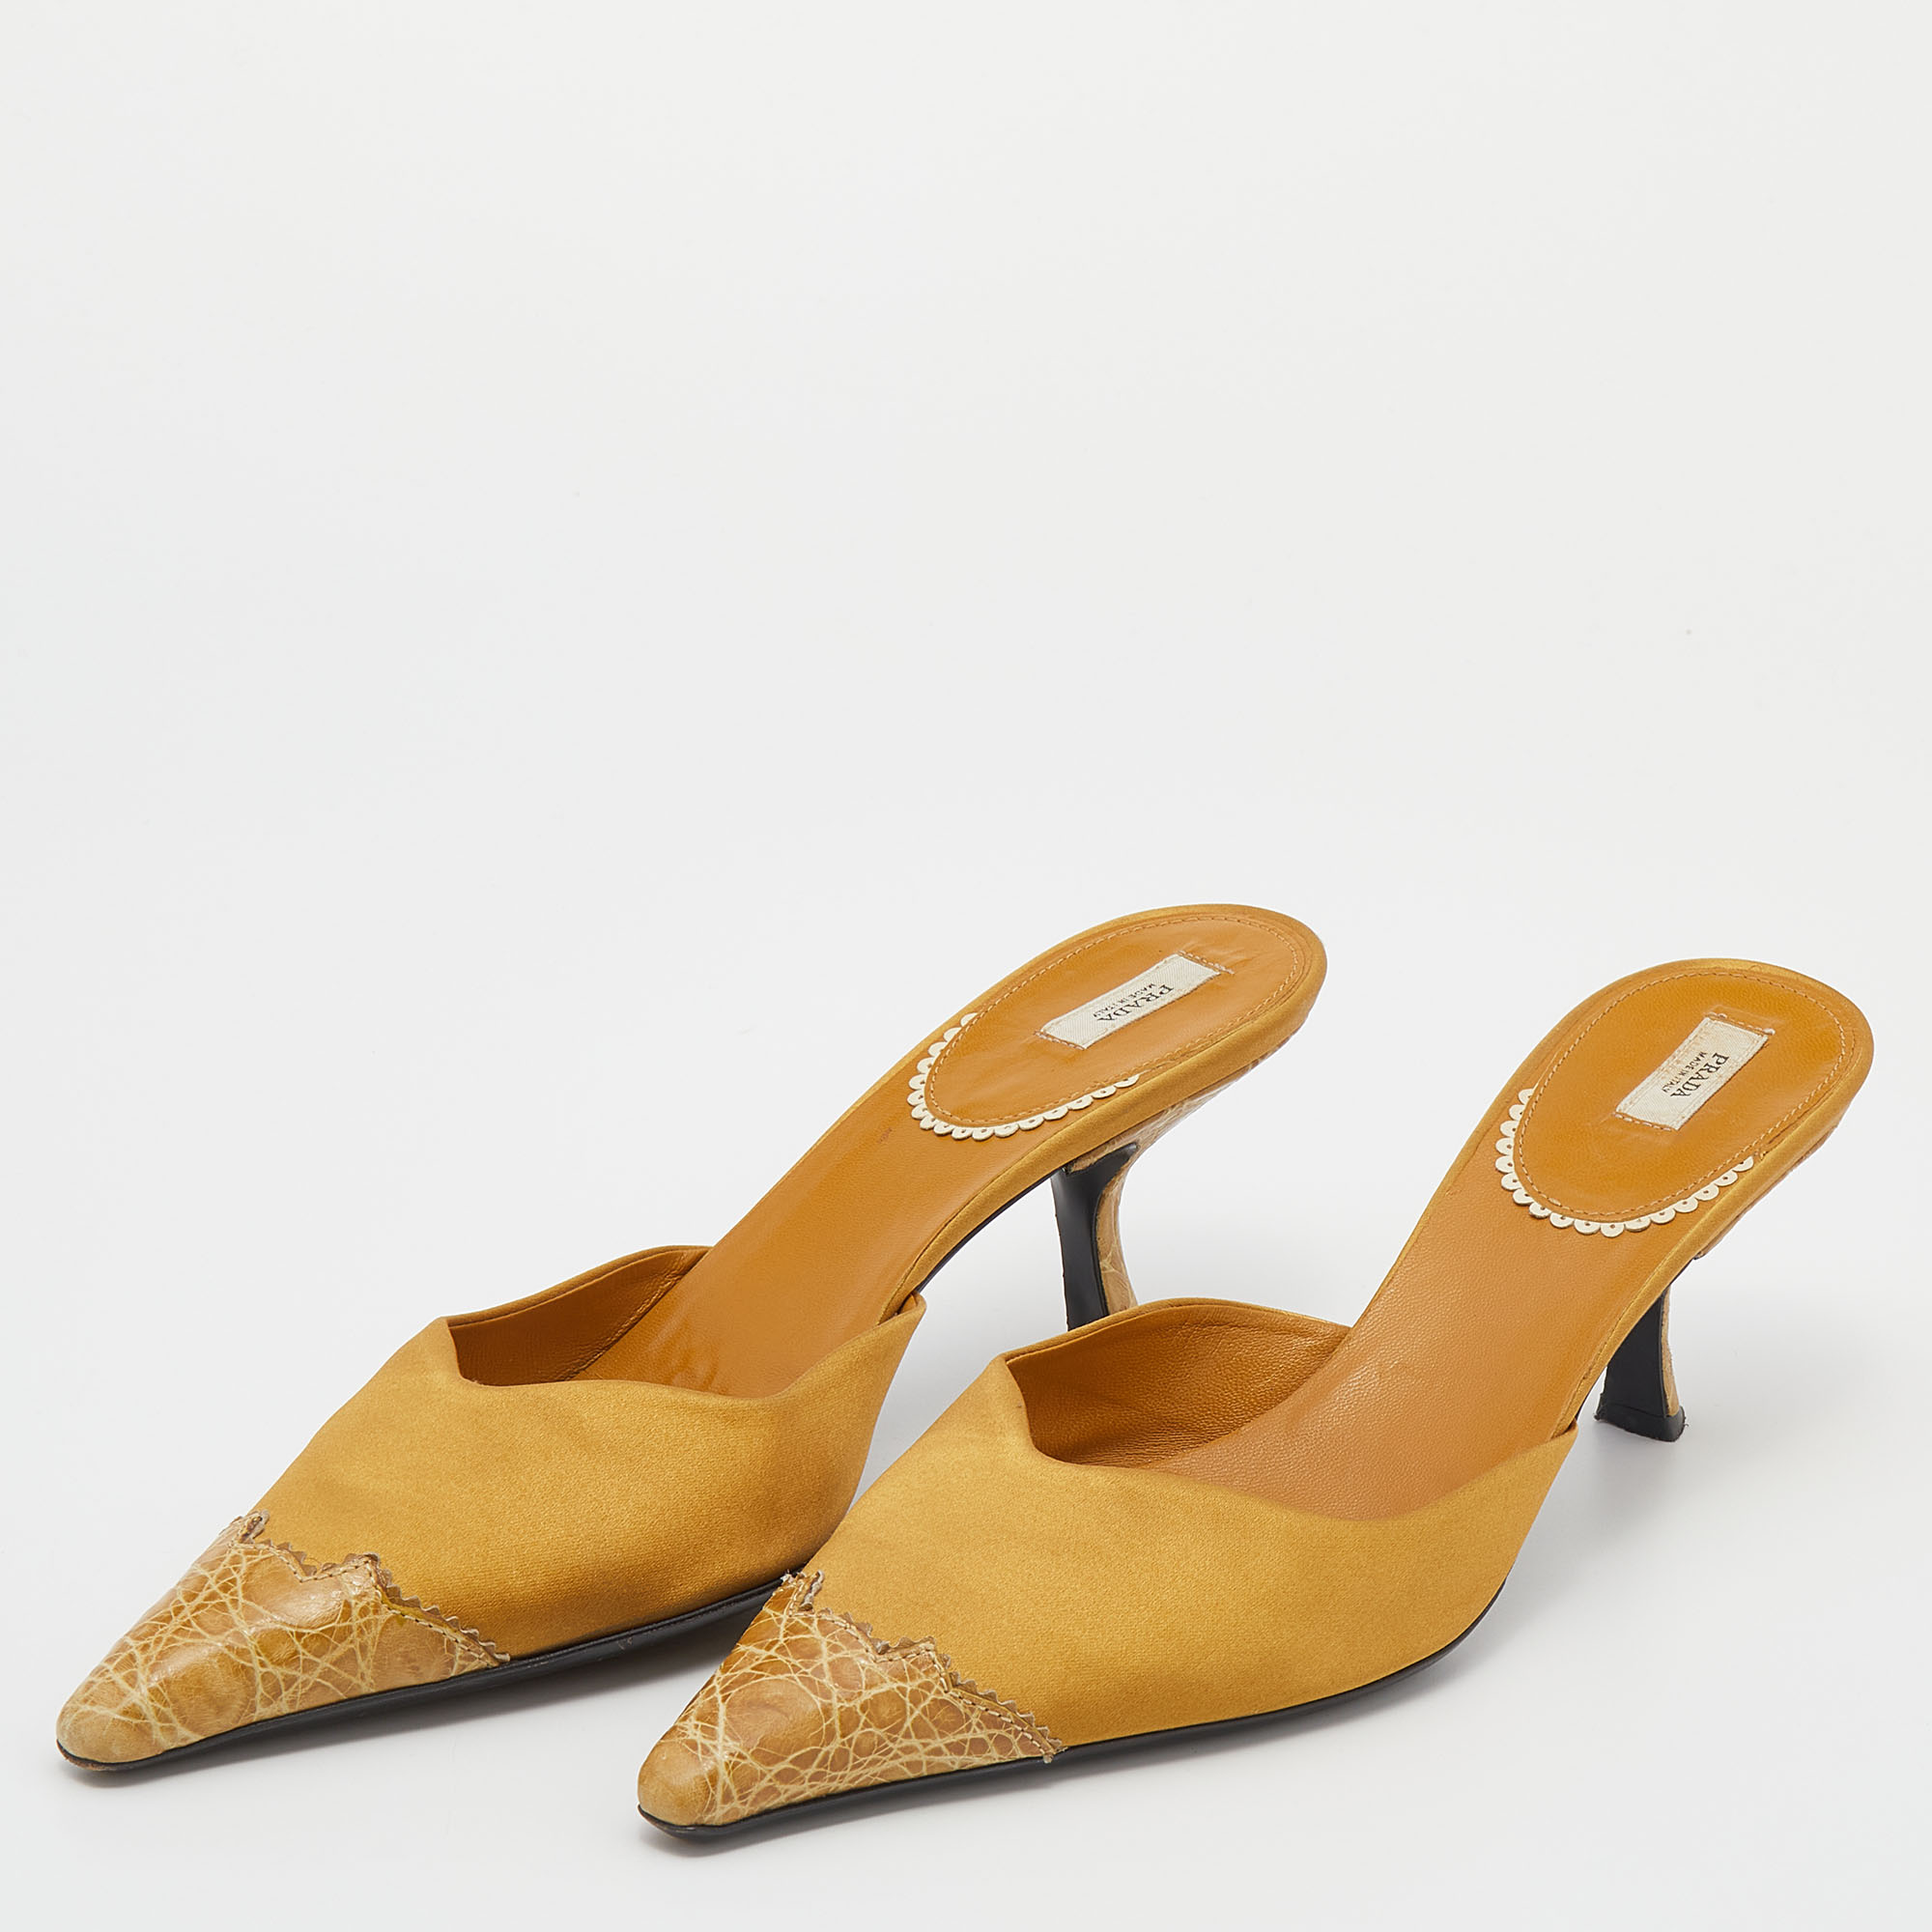 

Prada Mustard Yellow Satin And Crocodile Leather Pointed Toe Mule Sandals Size